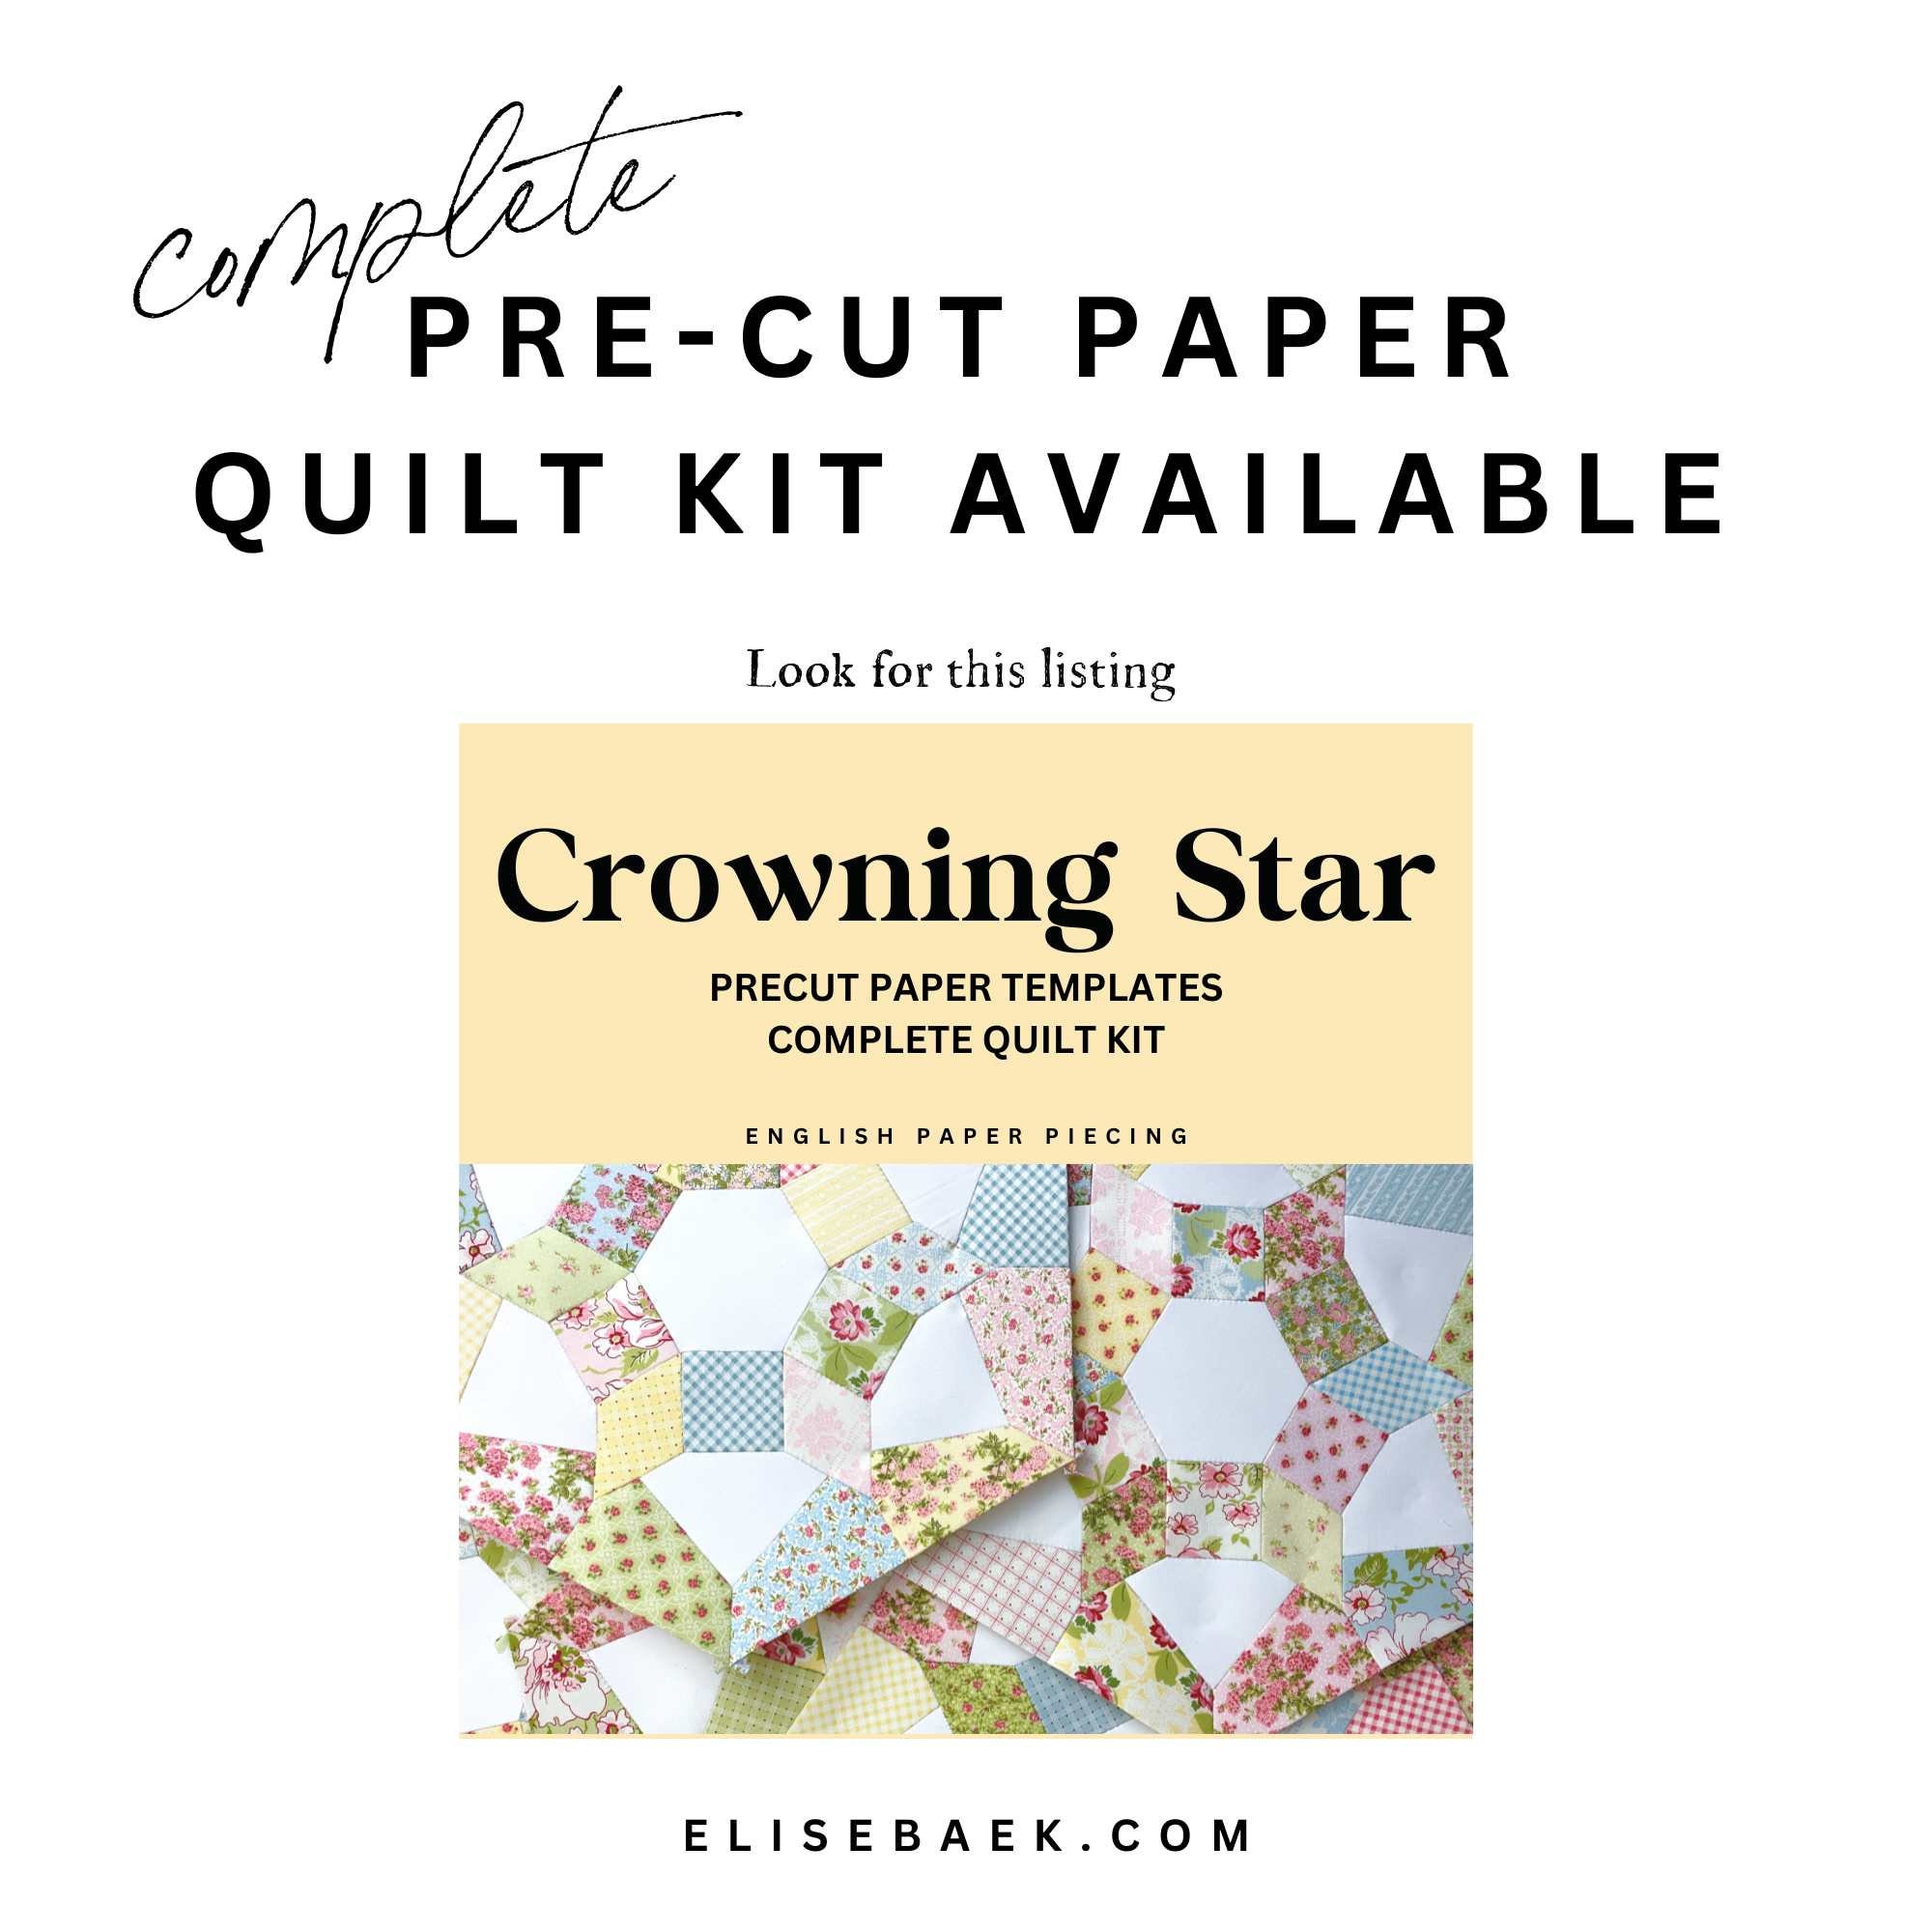 Crowning Star English Paper Piecing Quilt PDF Templates Print and